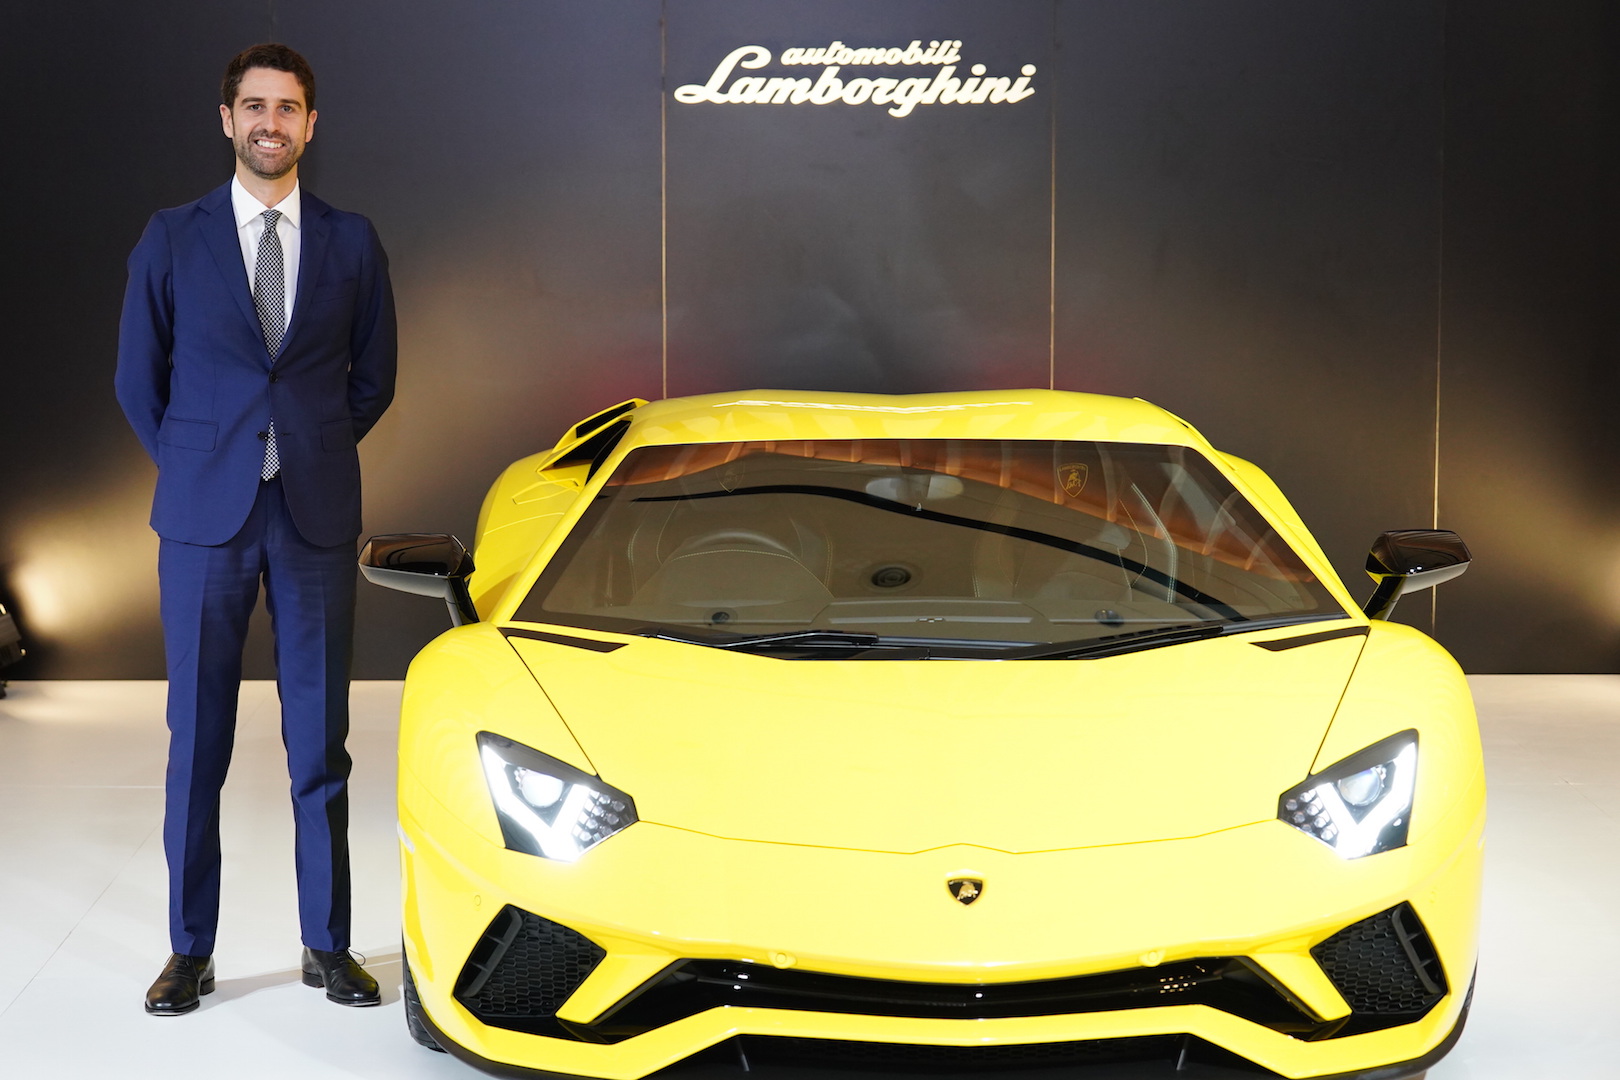 Lamborghini Asia Pacific CEO affirms that Thailand is one of the company’s strategic markets in Asia